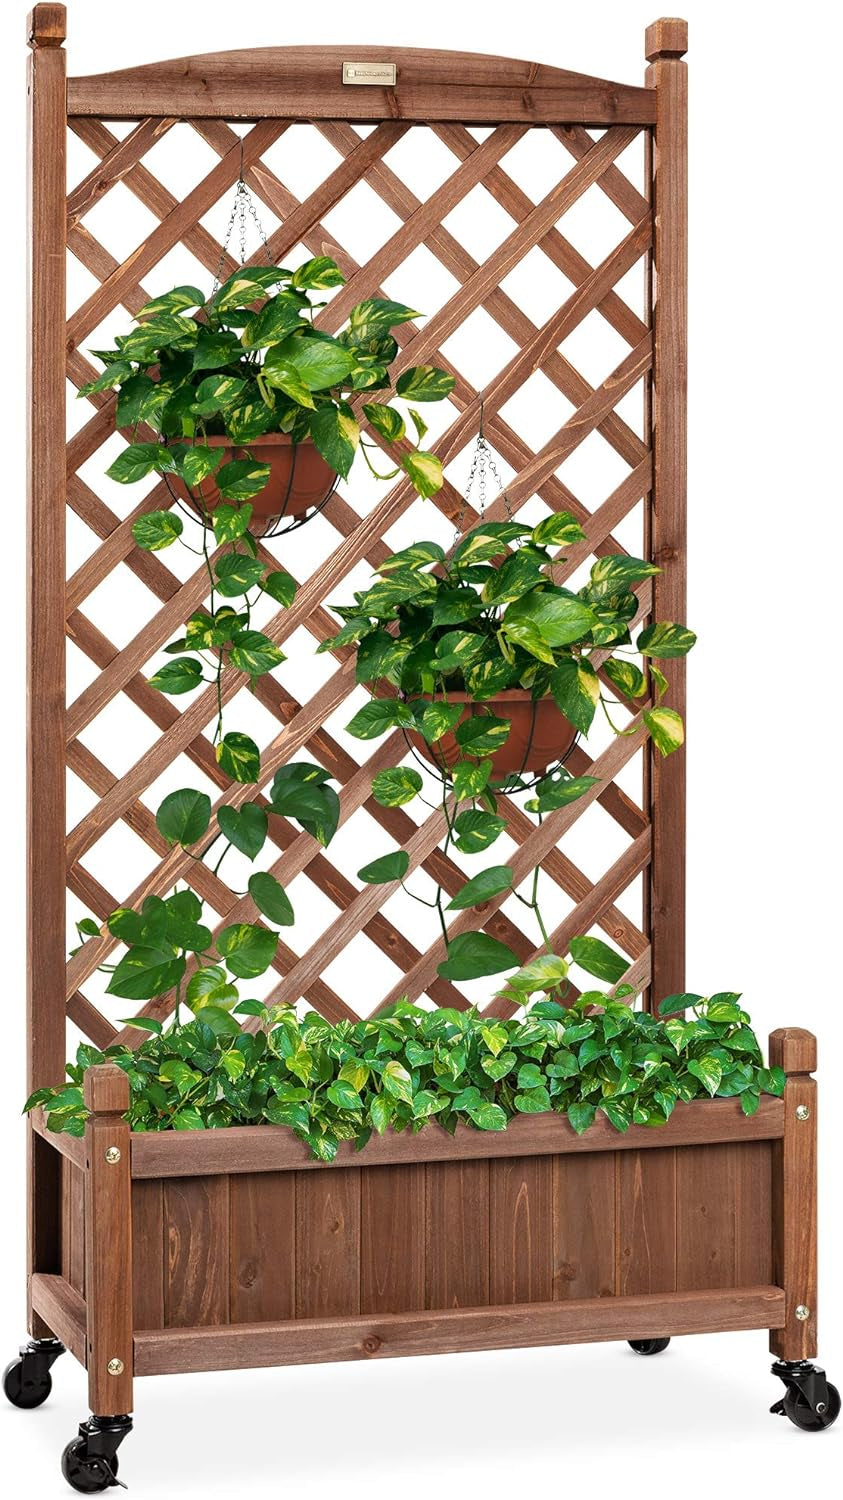 Best Choice Products 60In Wood Planter Box & Diamond Lattice Trellis, Mobile Outdoor Raised Garden Bed for Climbing Plants W/Drainage Holes, Optional Wheels - Walnut